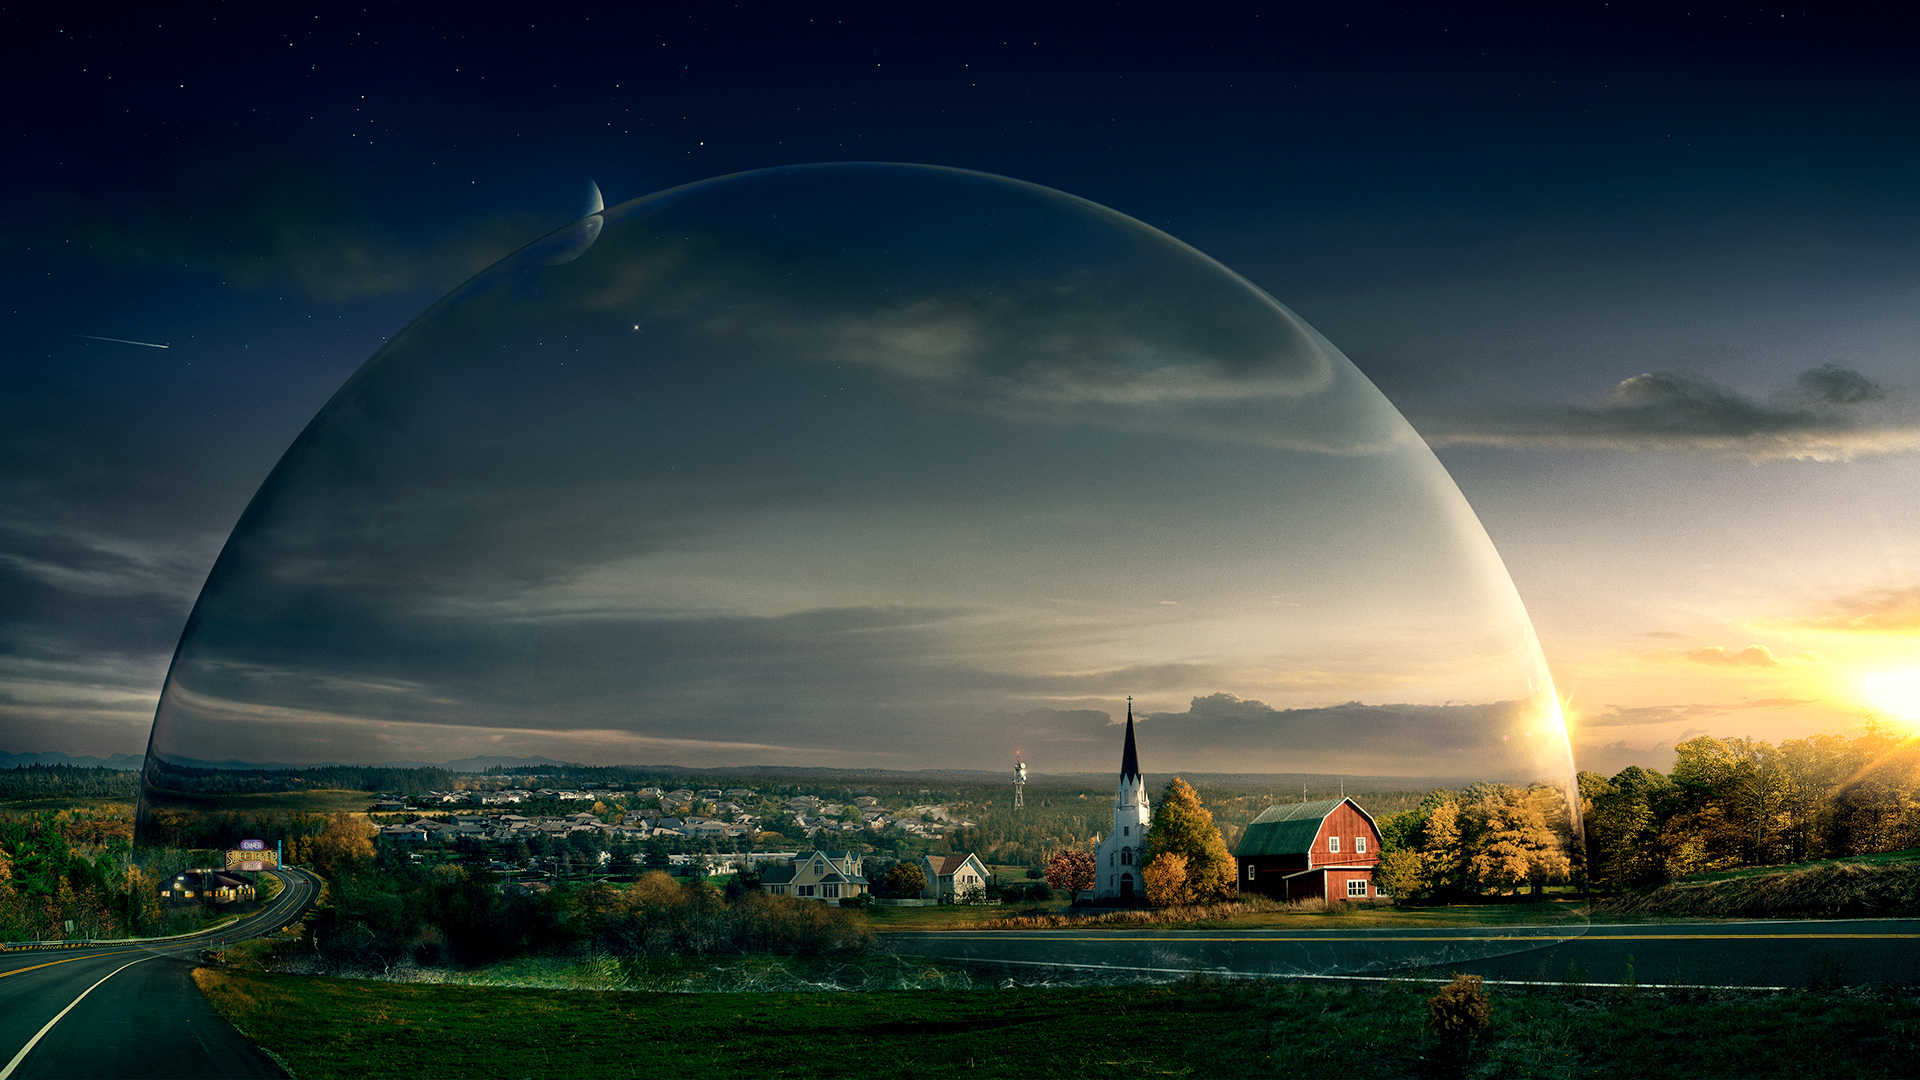 TV Show Under The Dome HD Wallpaper | Background Image